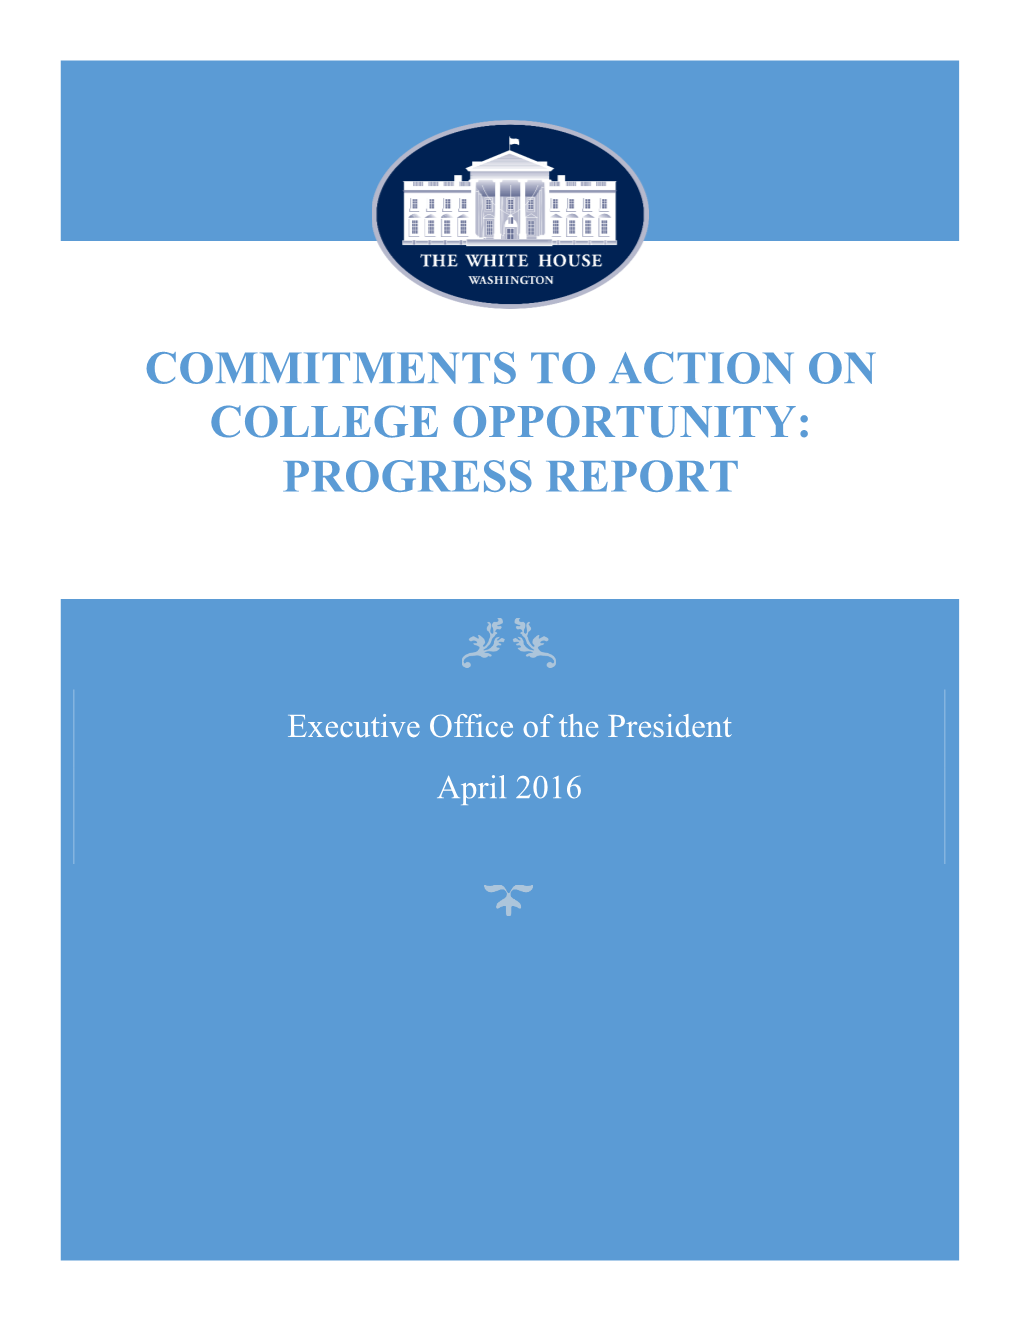 Commitments to Action on College Opportunity: Progress Report